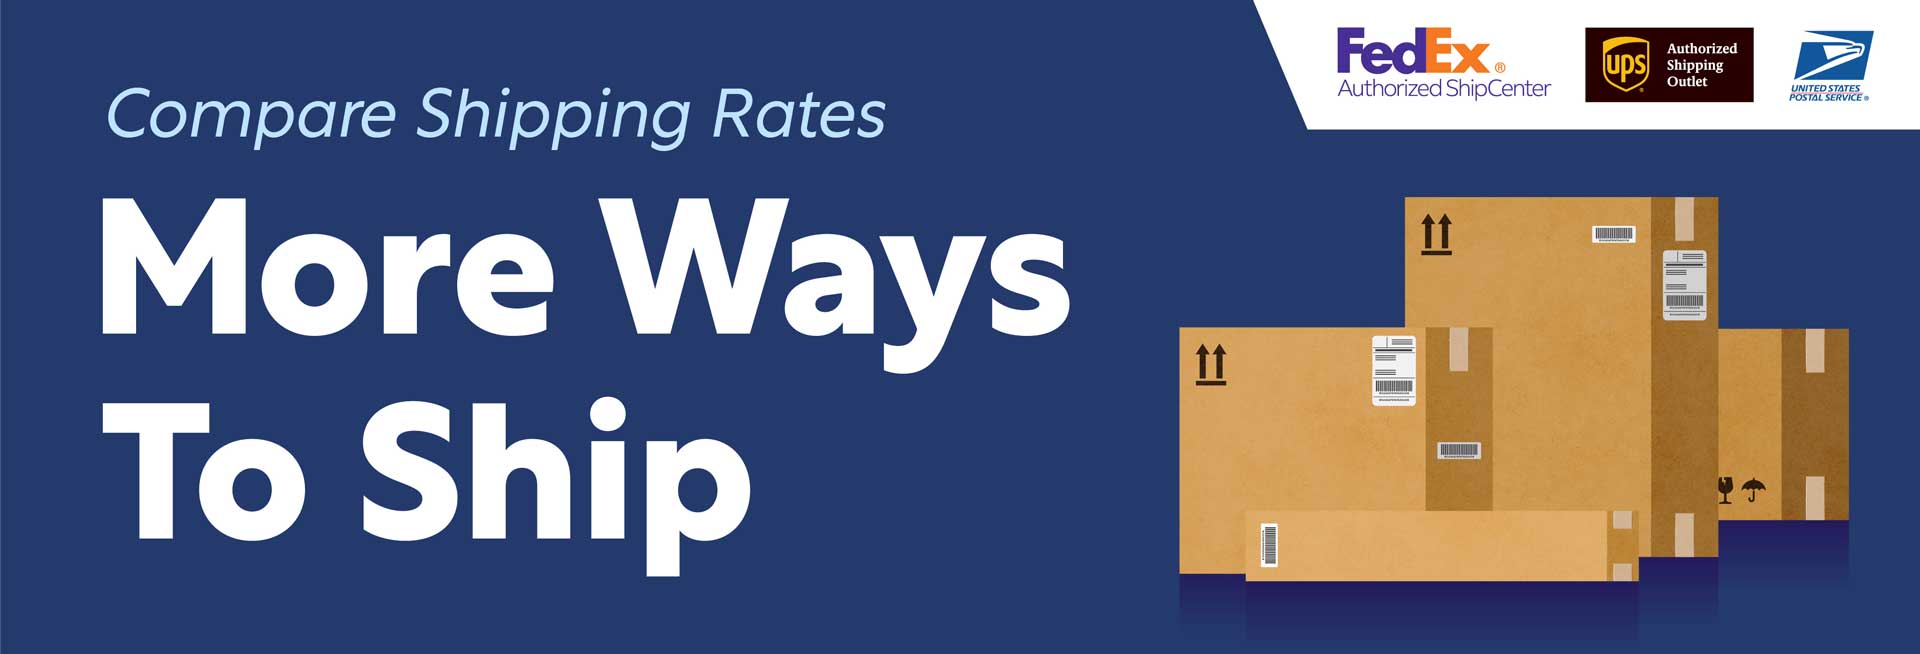 COMPARE SHIPPING RATES - Your Package. Your Choice - UPS, FedEx, USPS